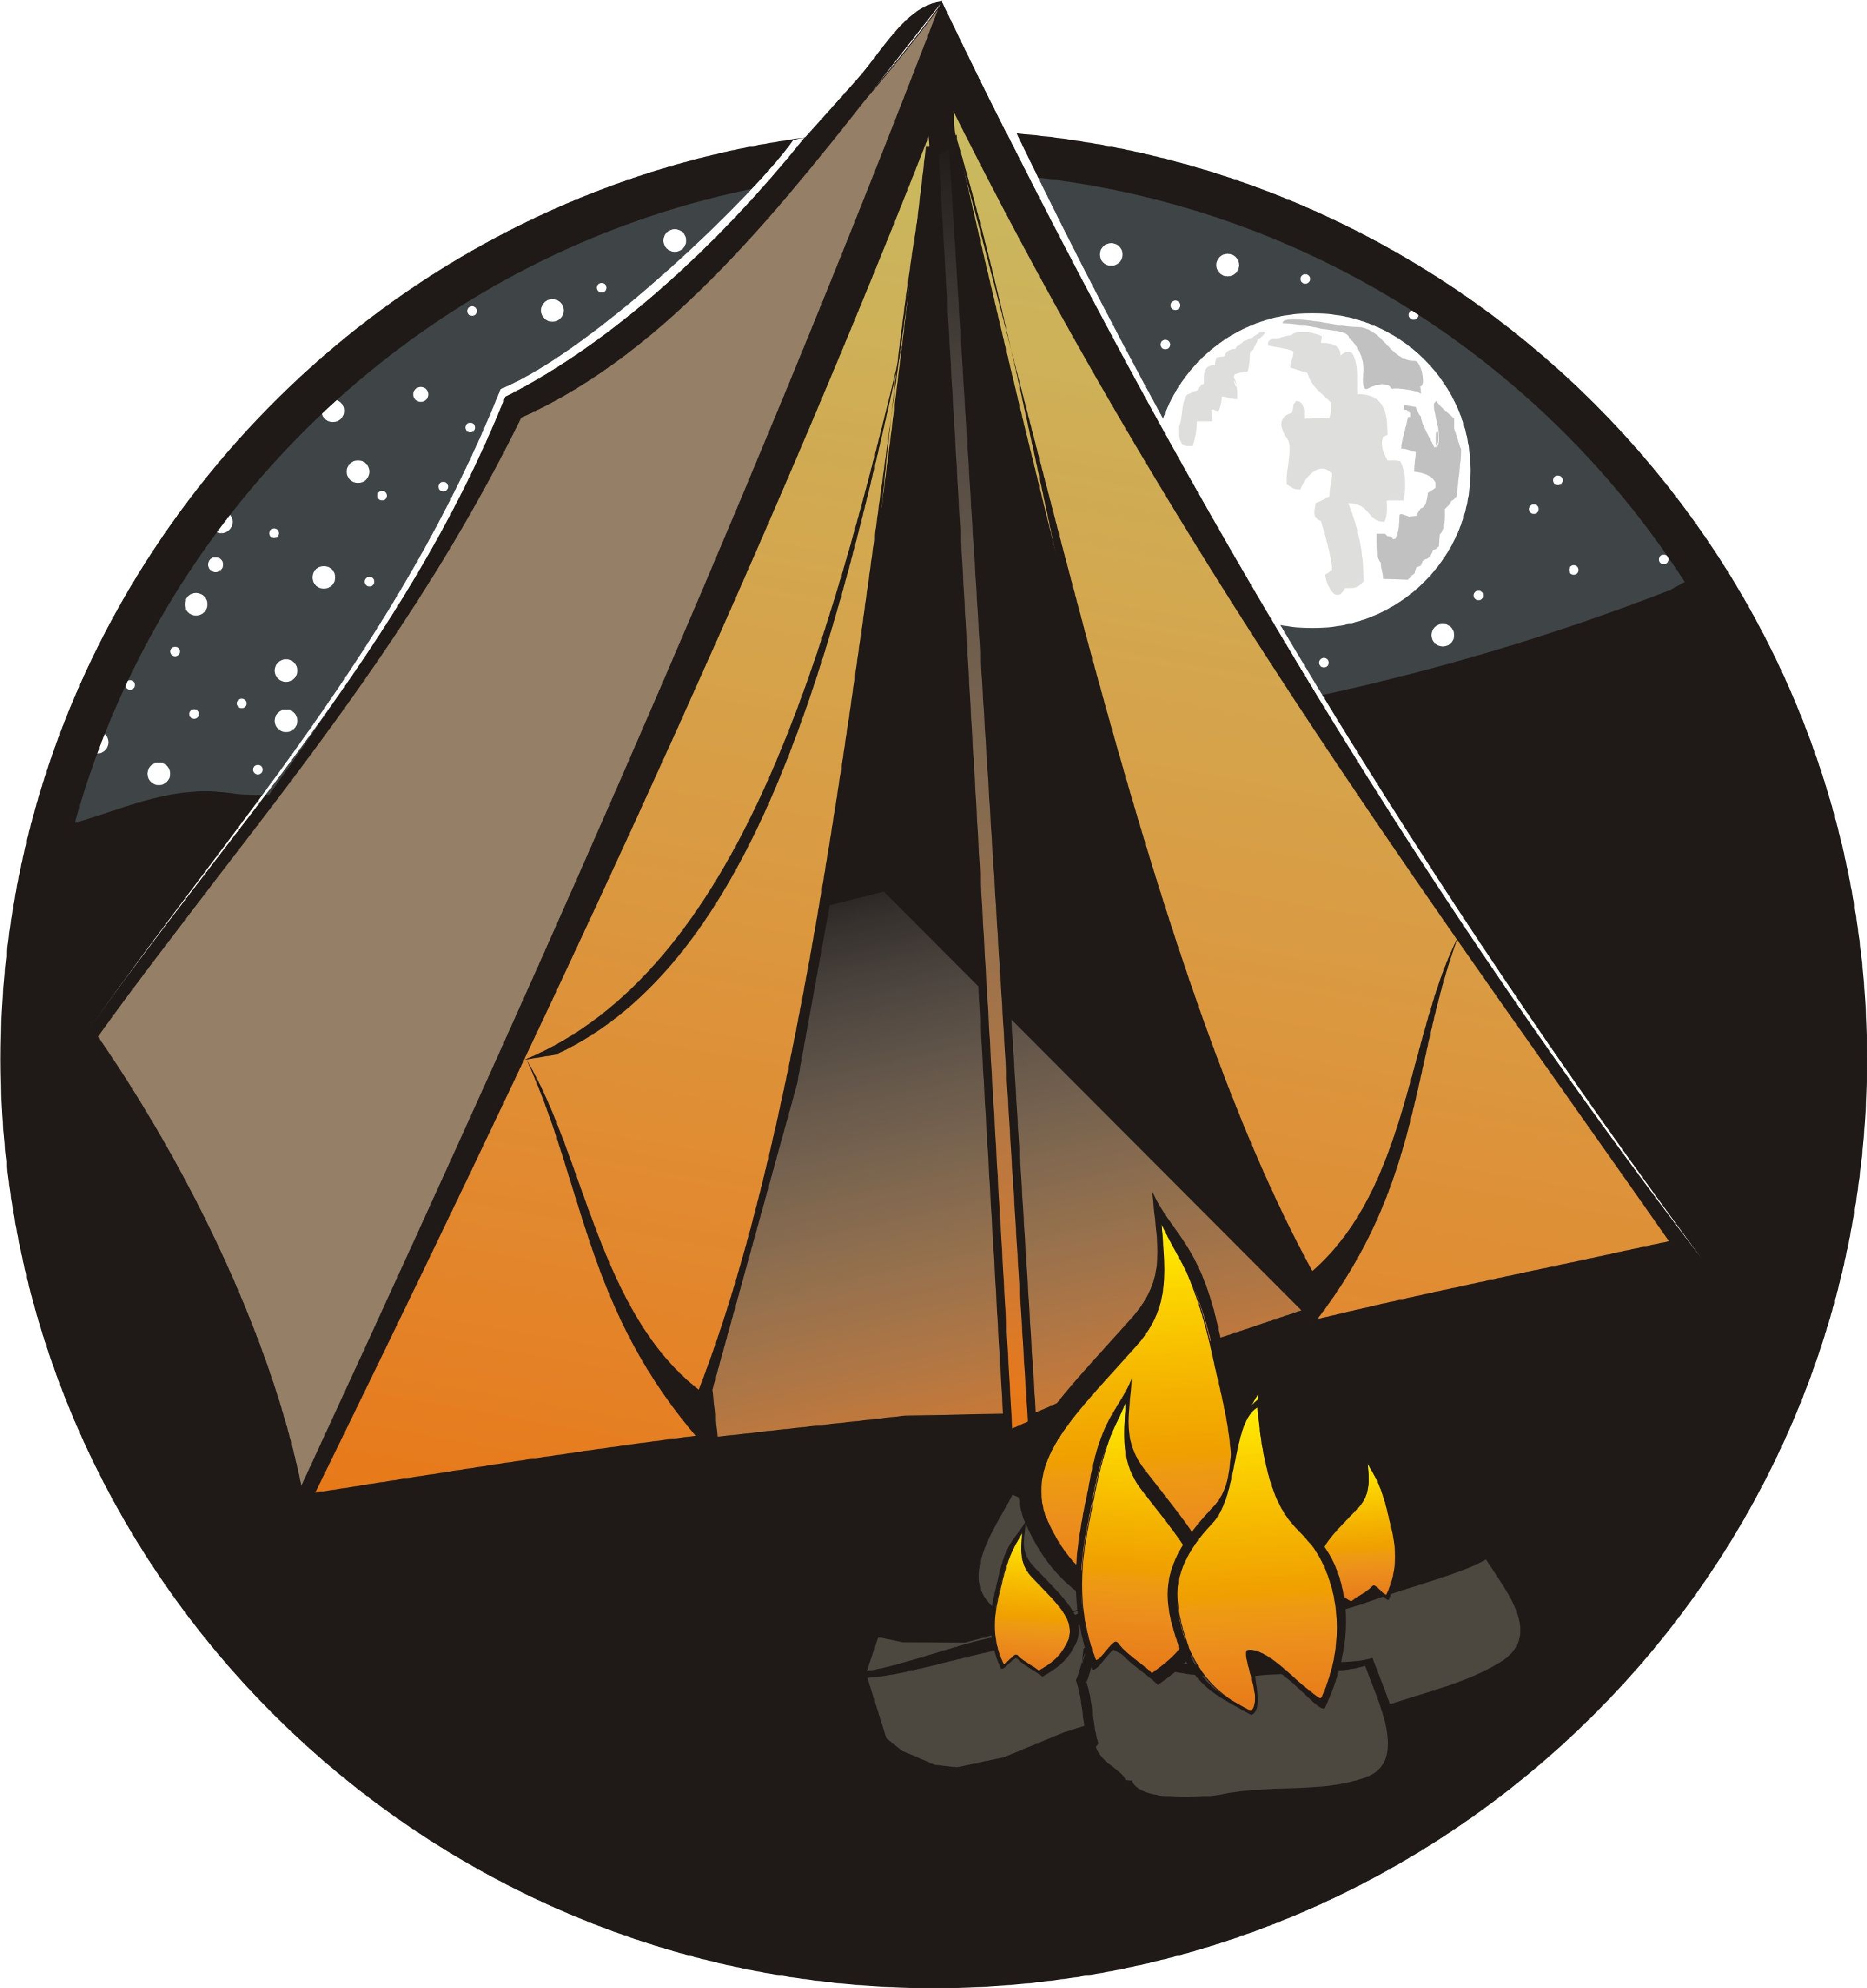 Camping Tent Dromfgc Top Png Image Clipart